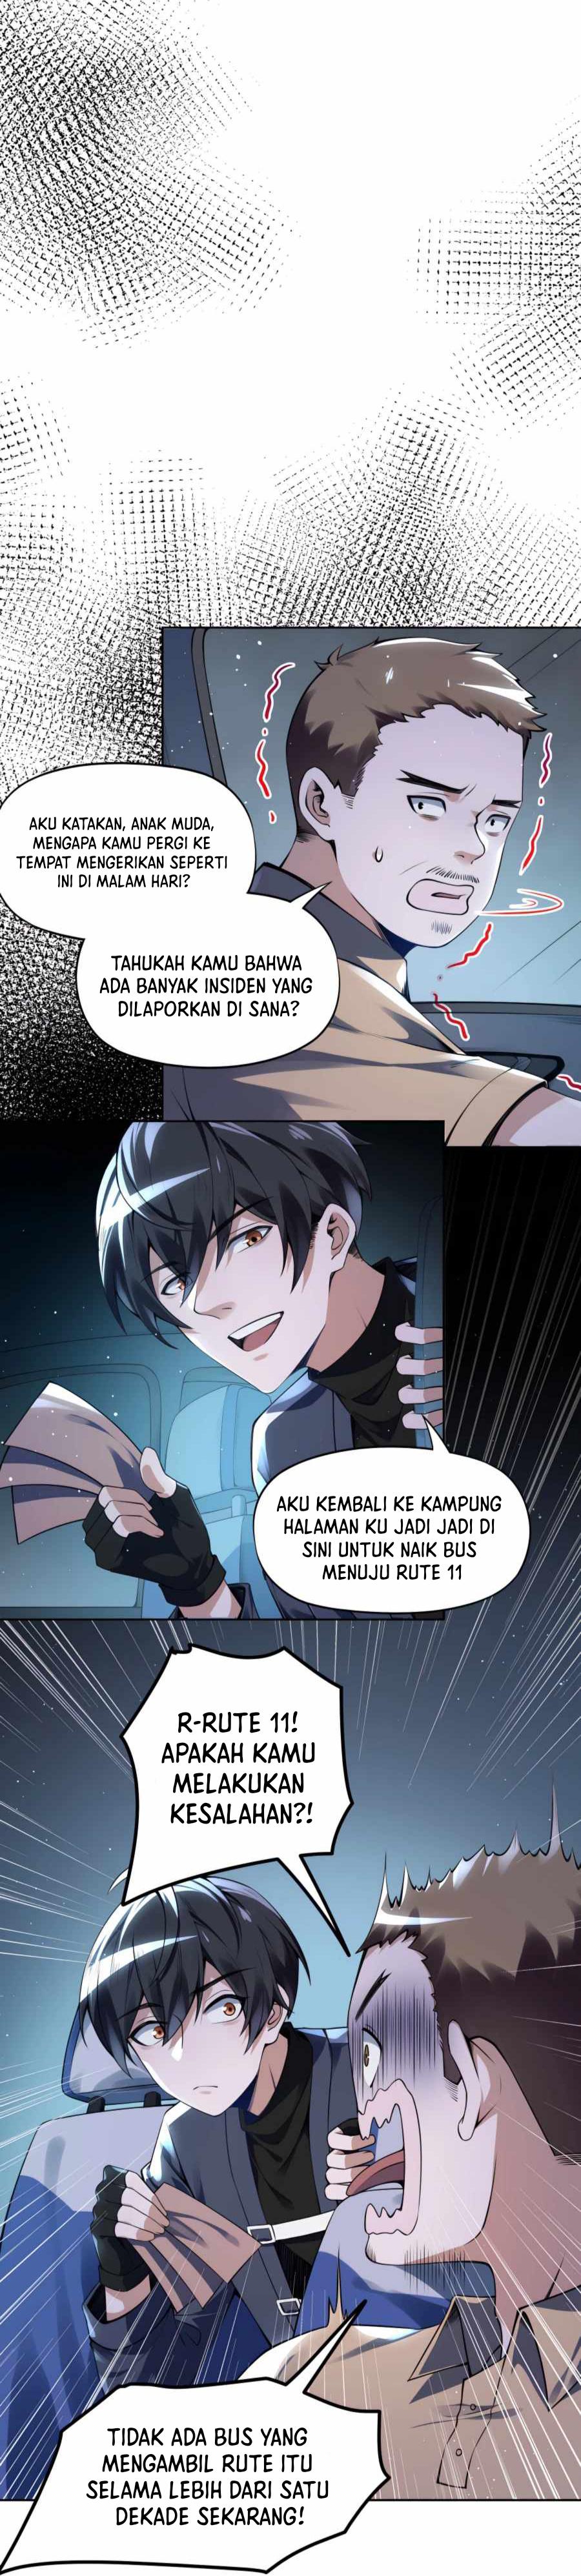 My Cells Kingdom Chapter 3 - 263